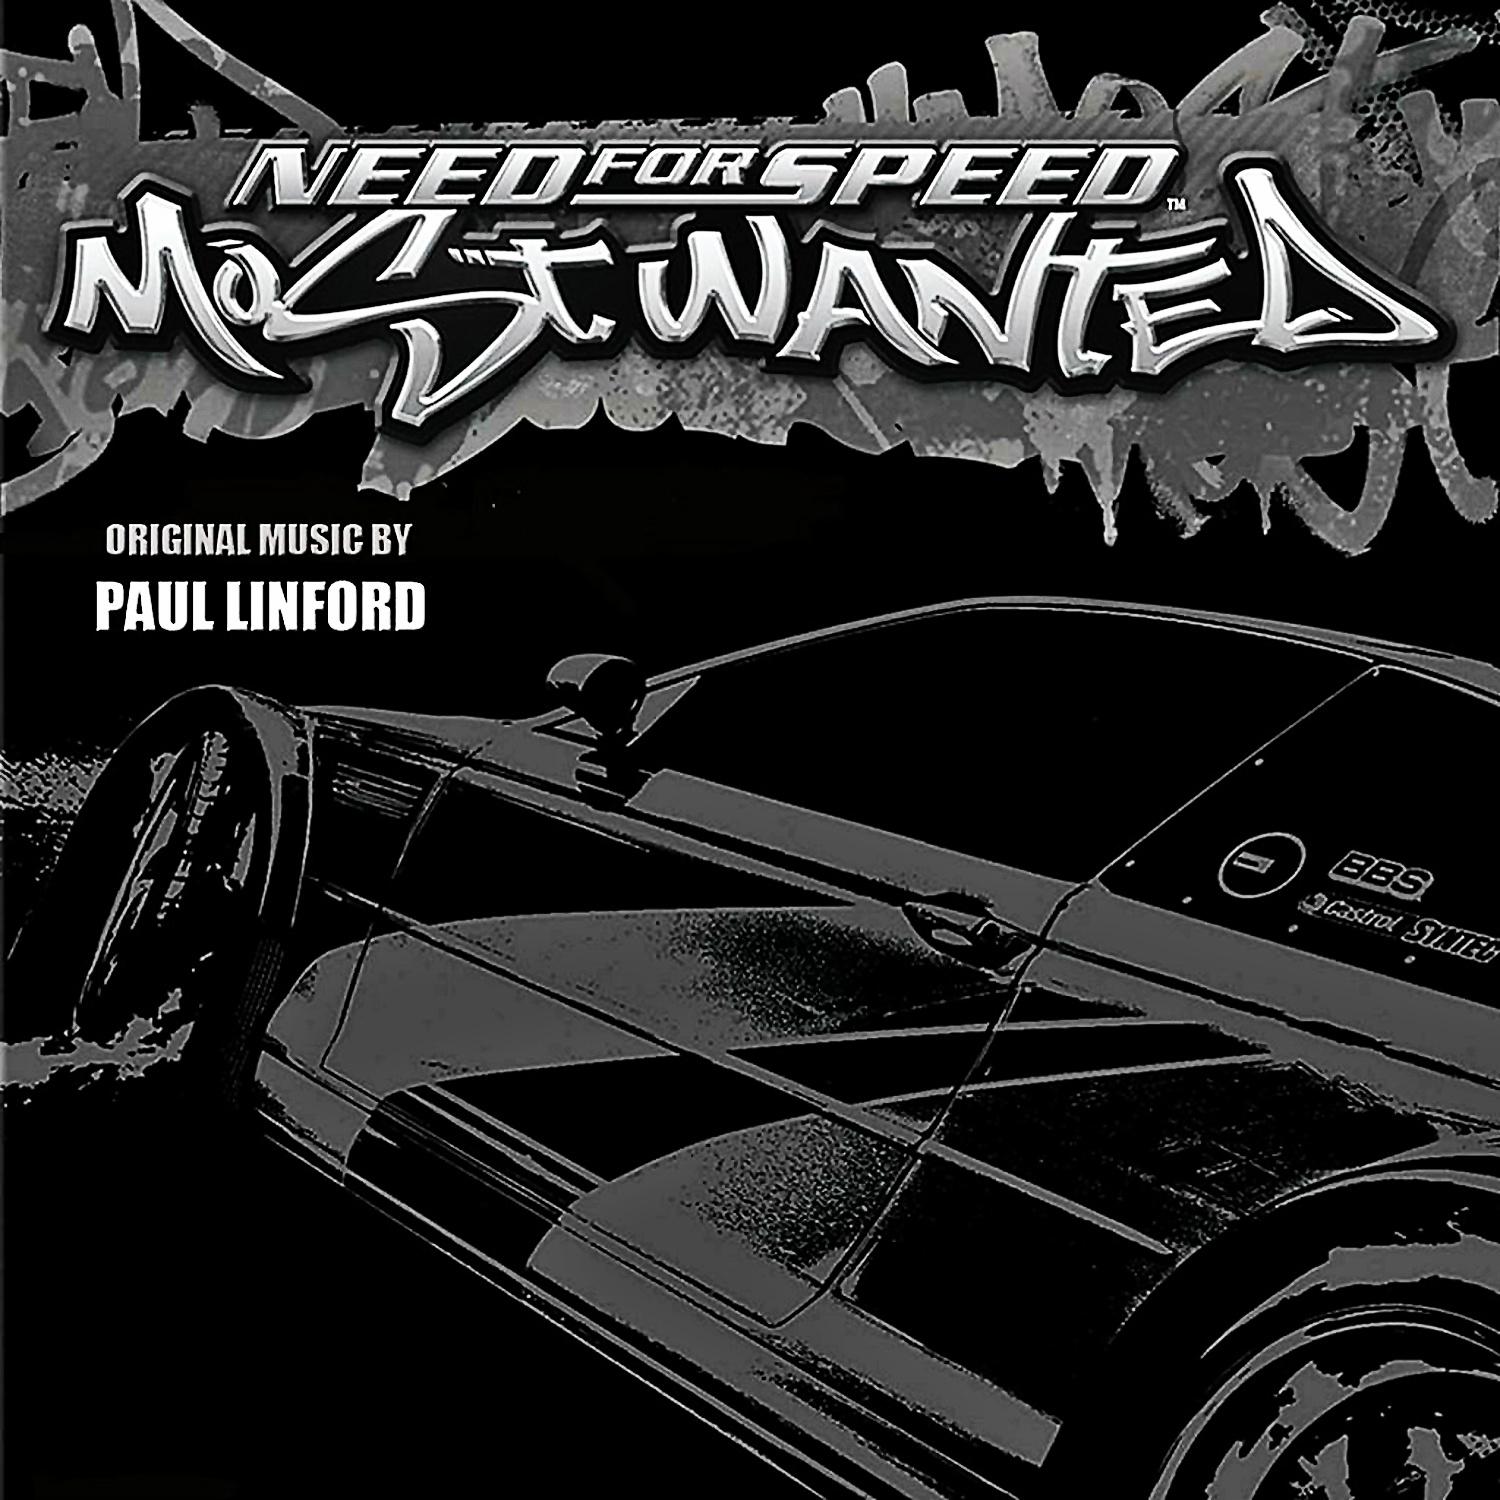 Need for speed most wanted песни. Need for Speed: most wanted. Мост вантед обложка. Need for Speed most wanted 2005. Need for Speed most wanted Black Edition.